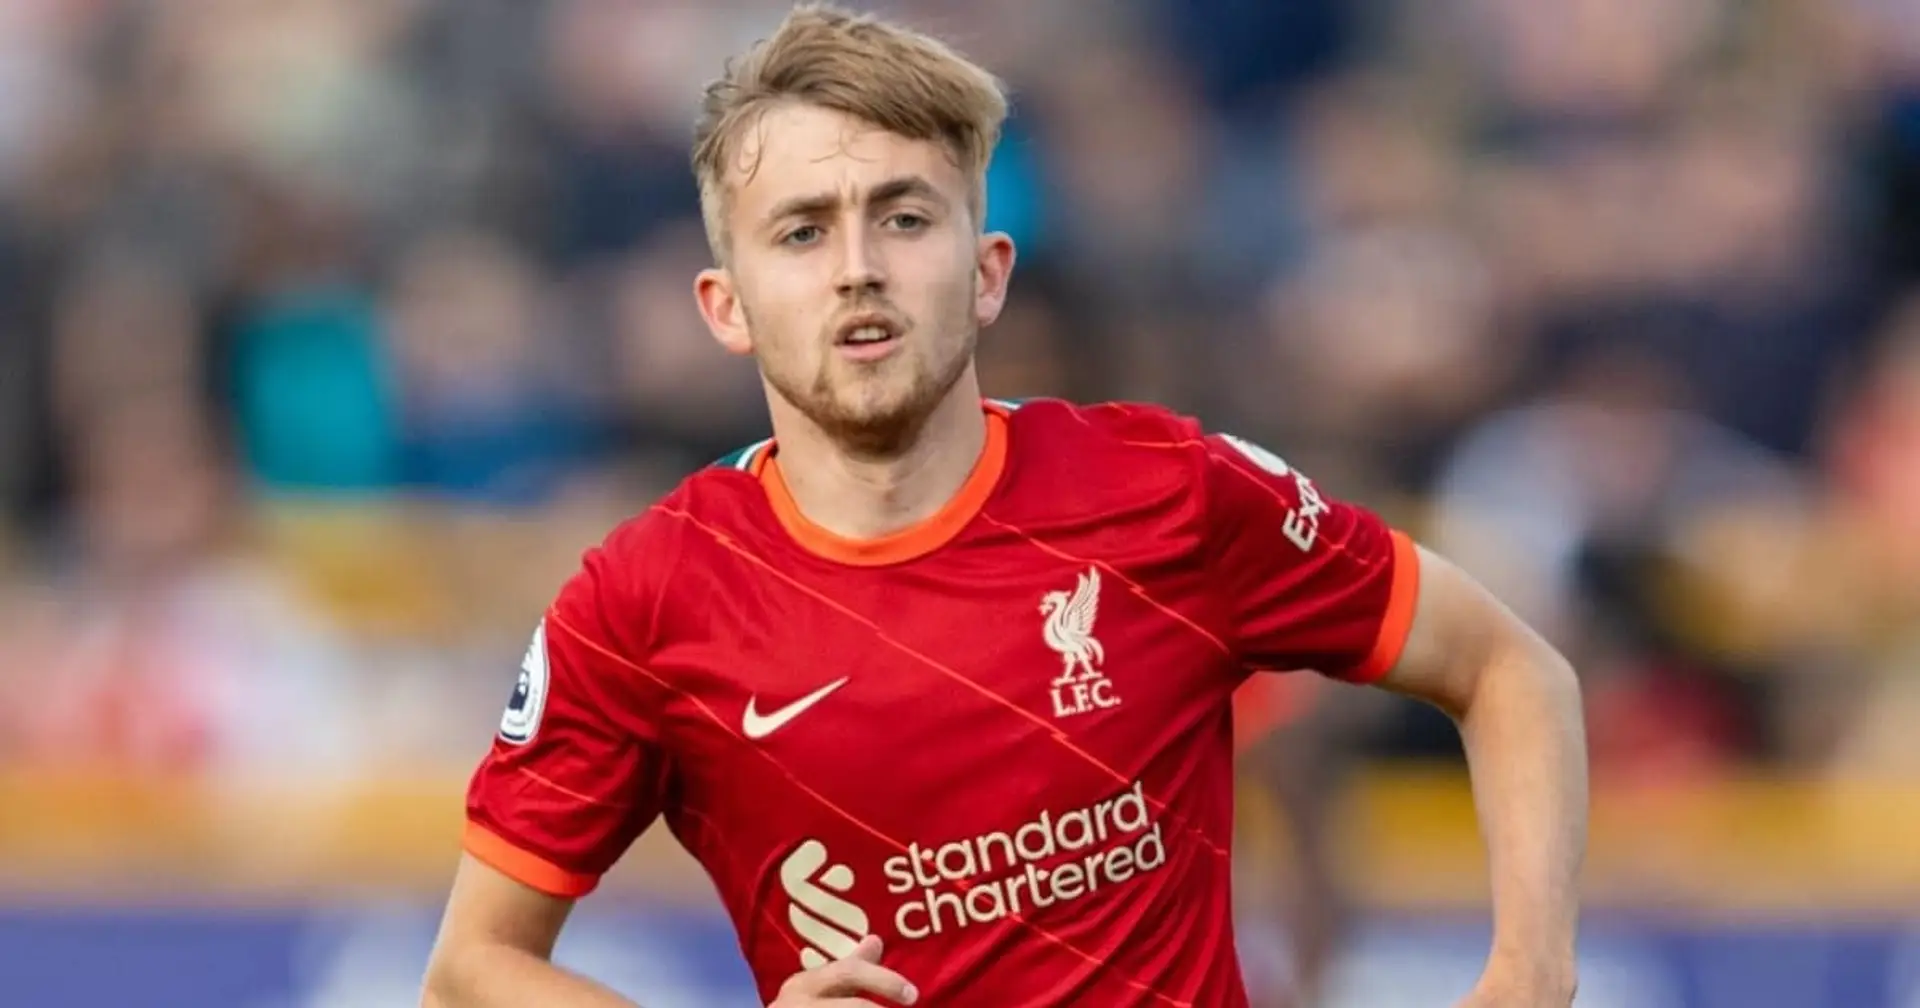 'I can’t lie, I was disappointed': Liverpool youngster presses desire to leave on loan